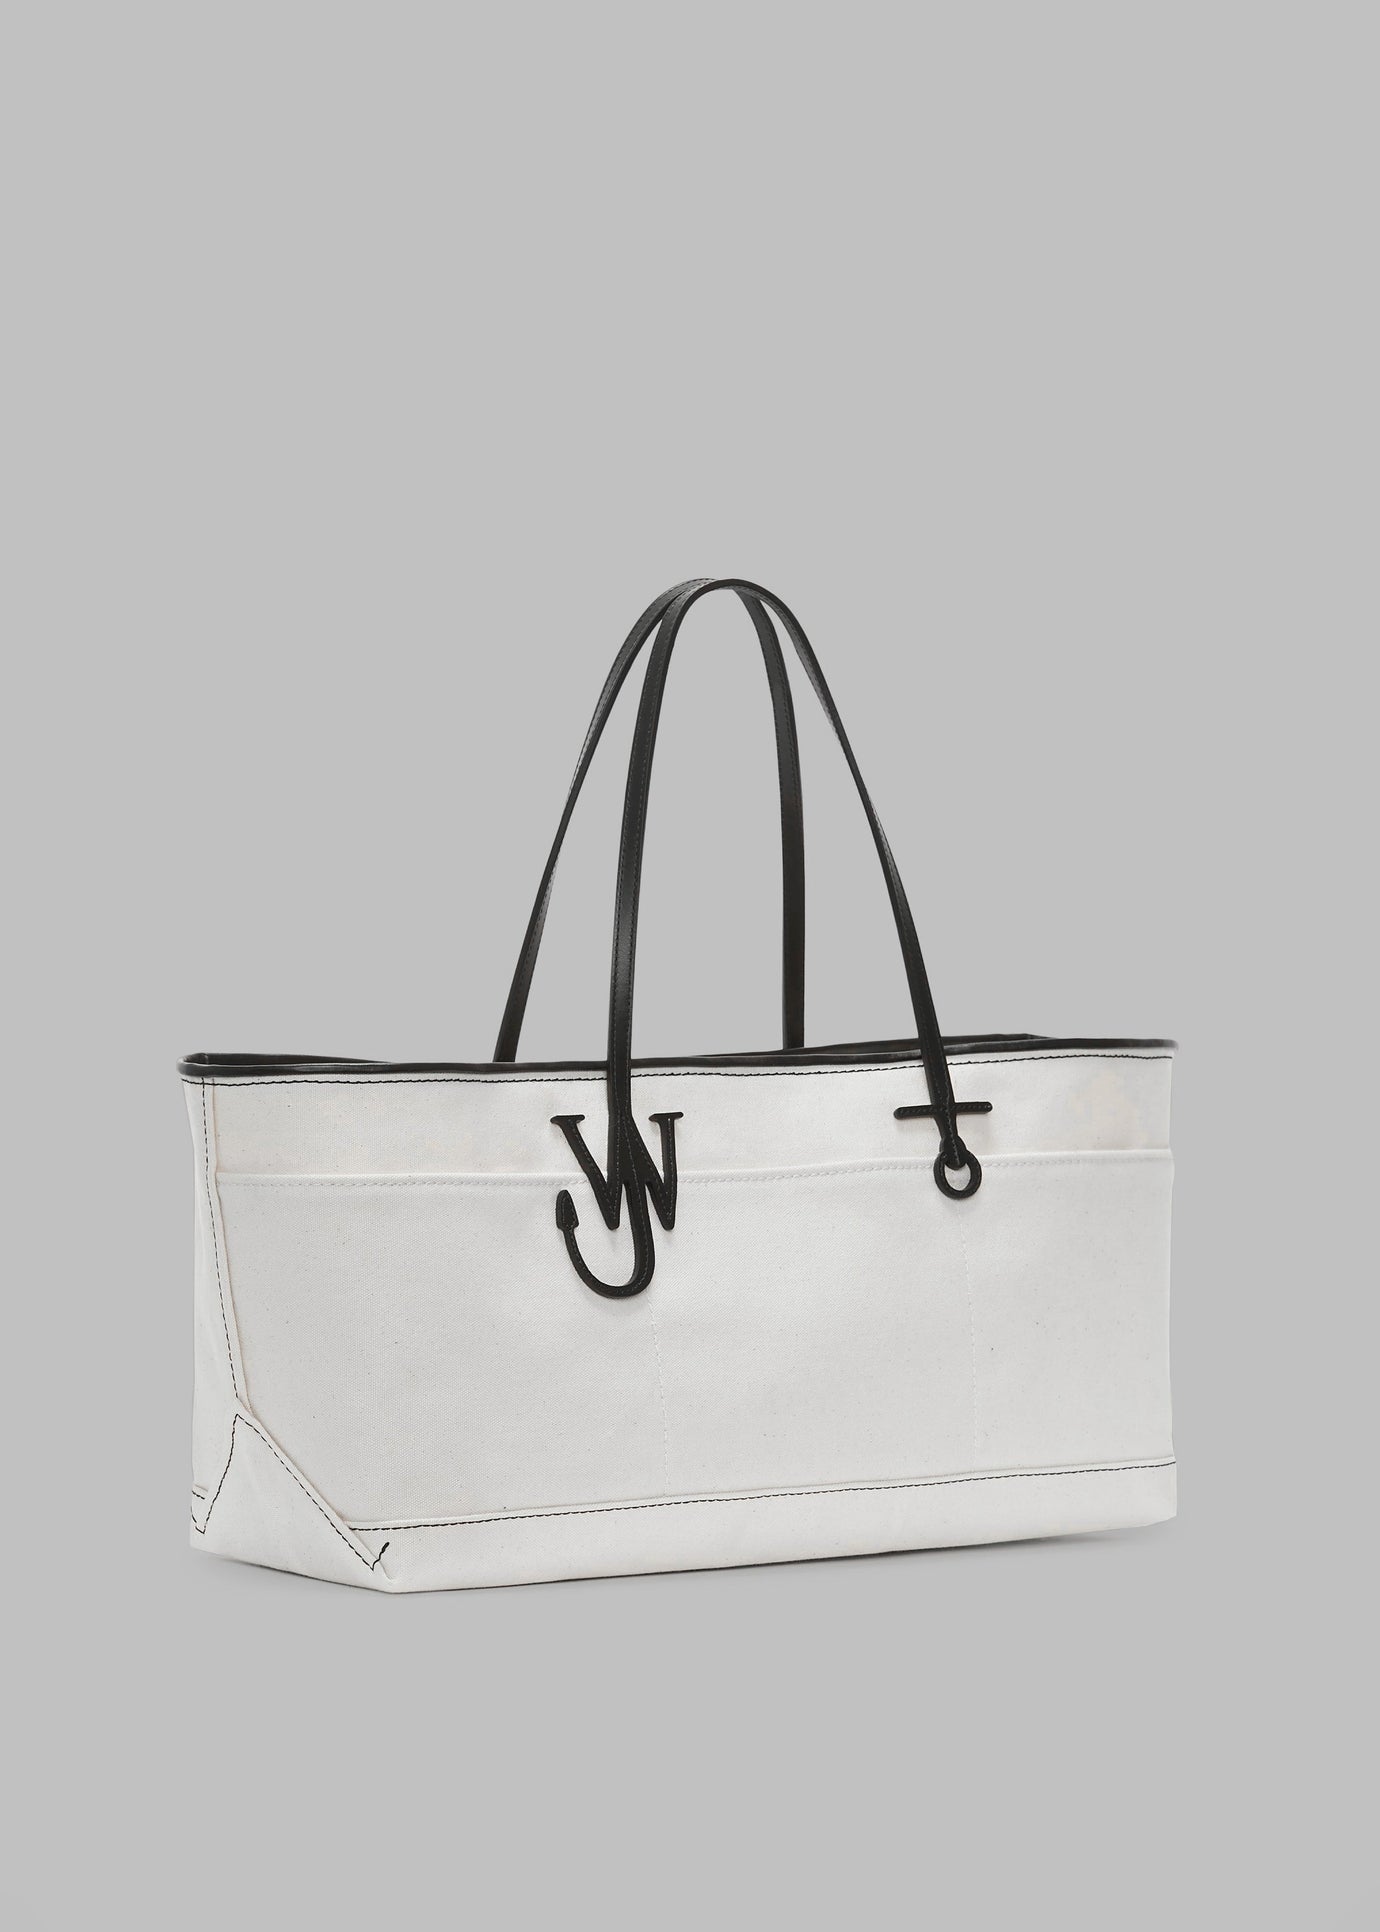 JW Anderson Anchor Stretch Tote - Natural/Black